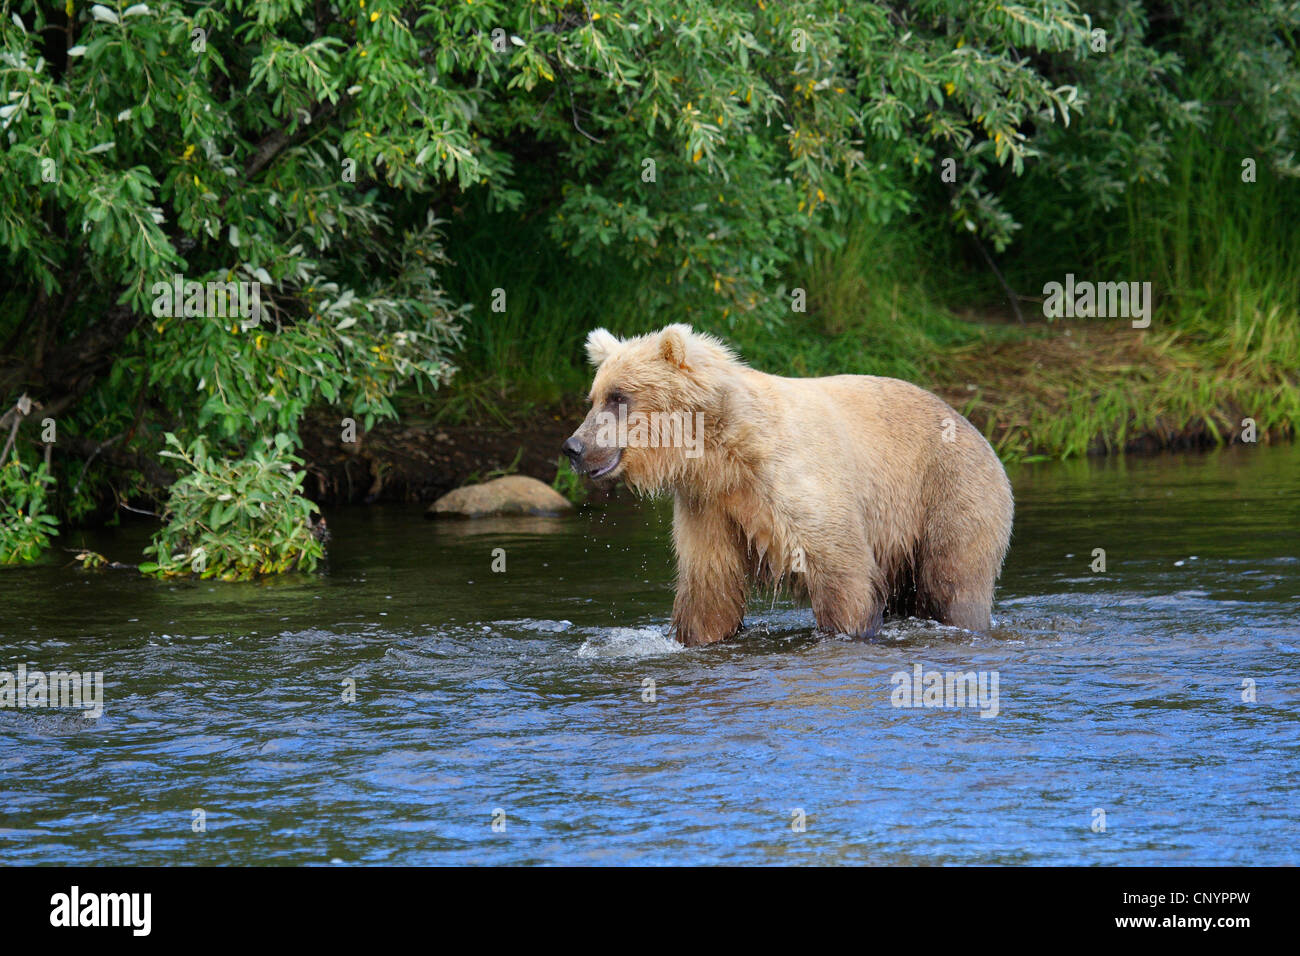 brown bear, grizzly bear, grizzly (Ursus arctos horribilis), standing in the shallow water of a river, USA, Alaska Stock Photo